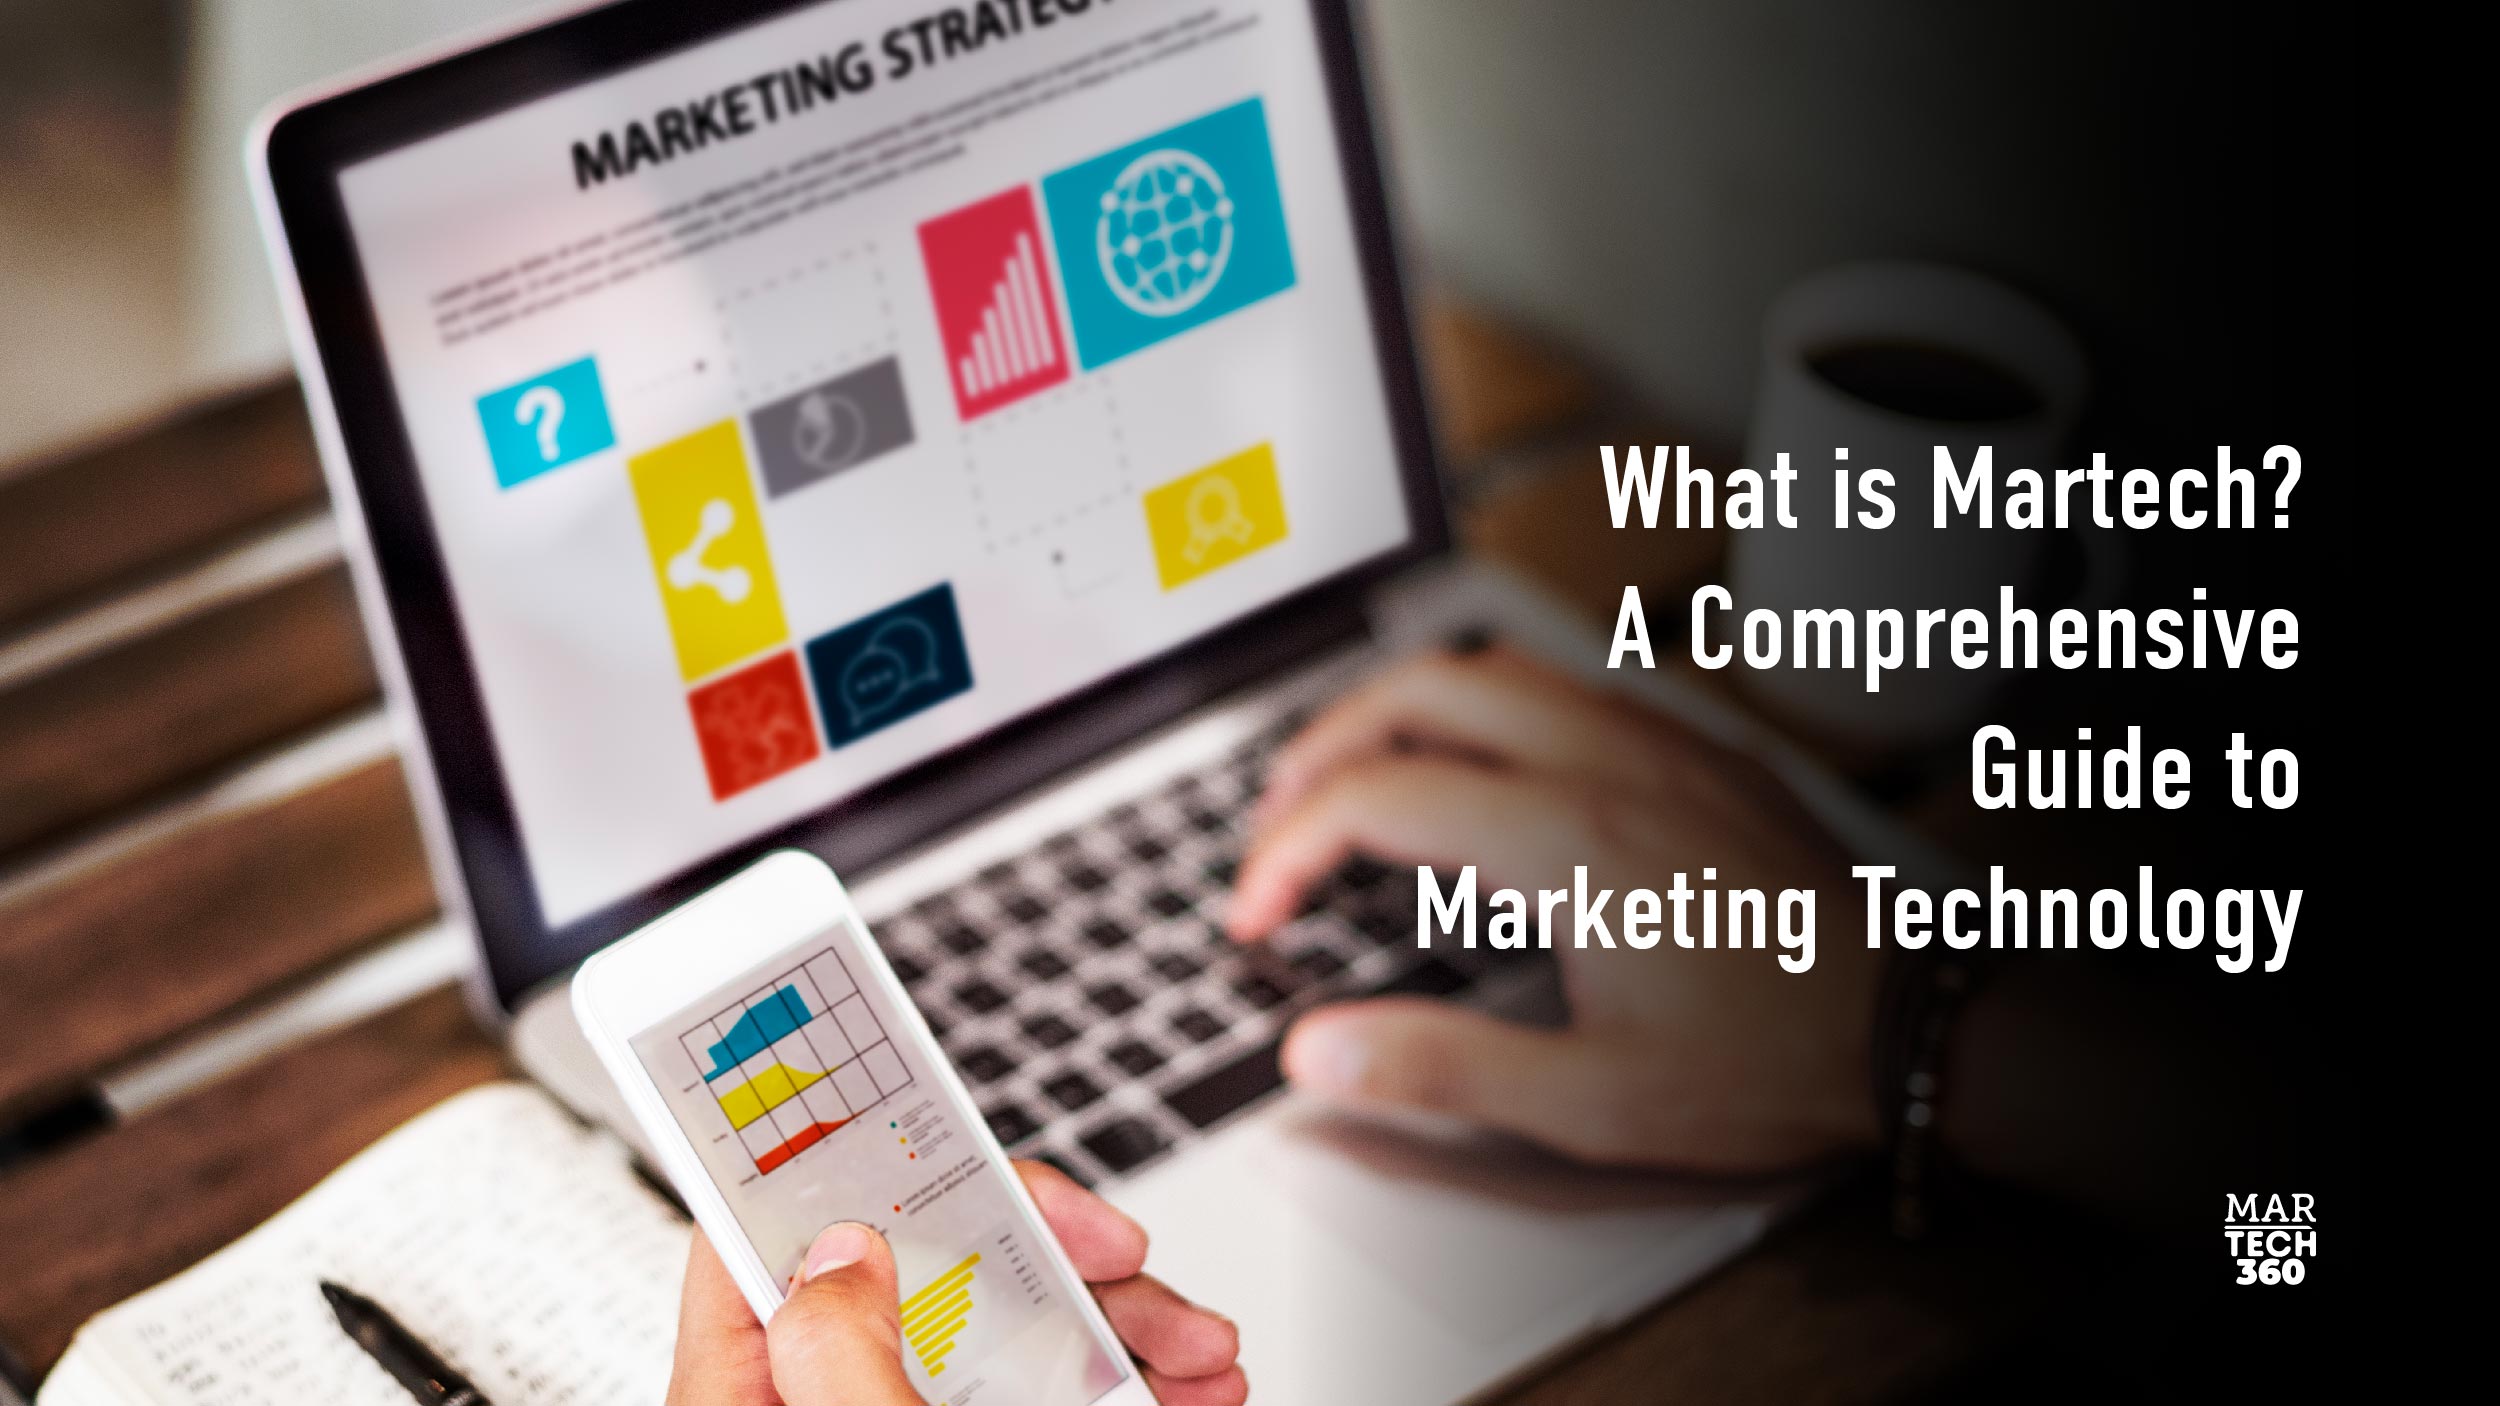 What is Martech? A Comprehensive Guide to Marketing Technology